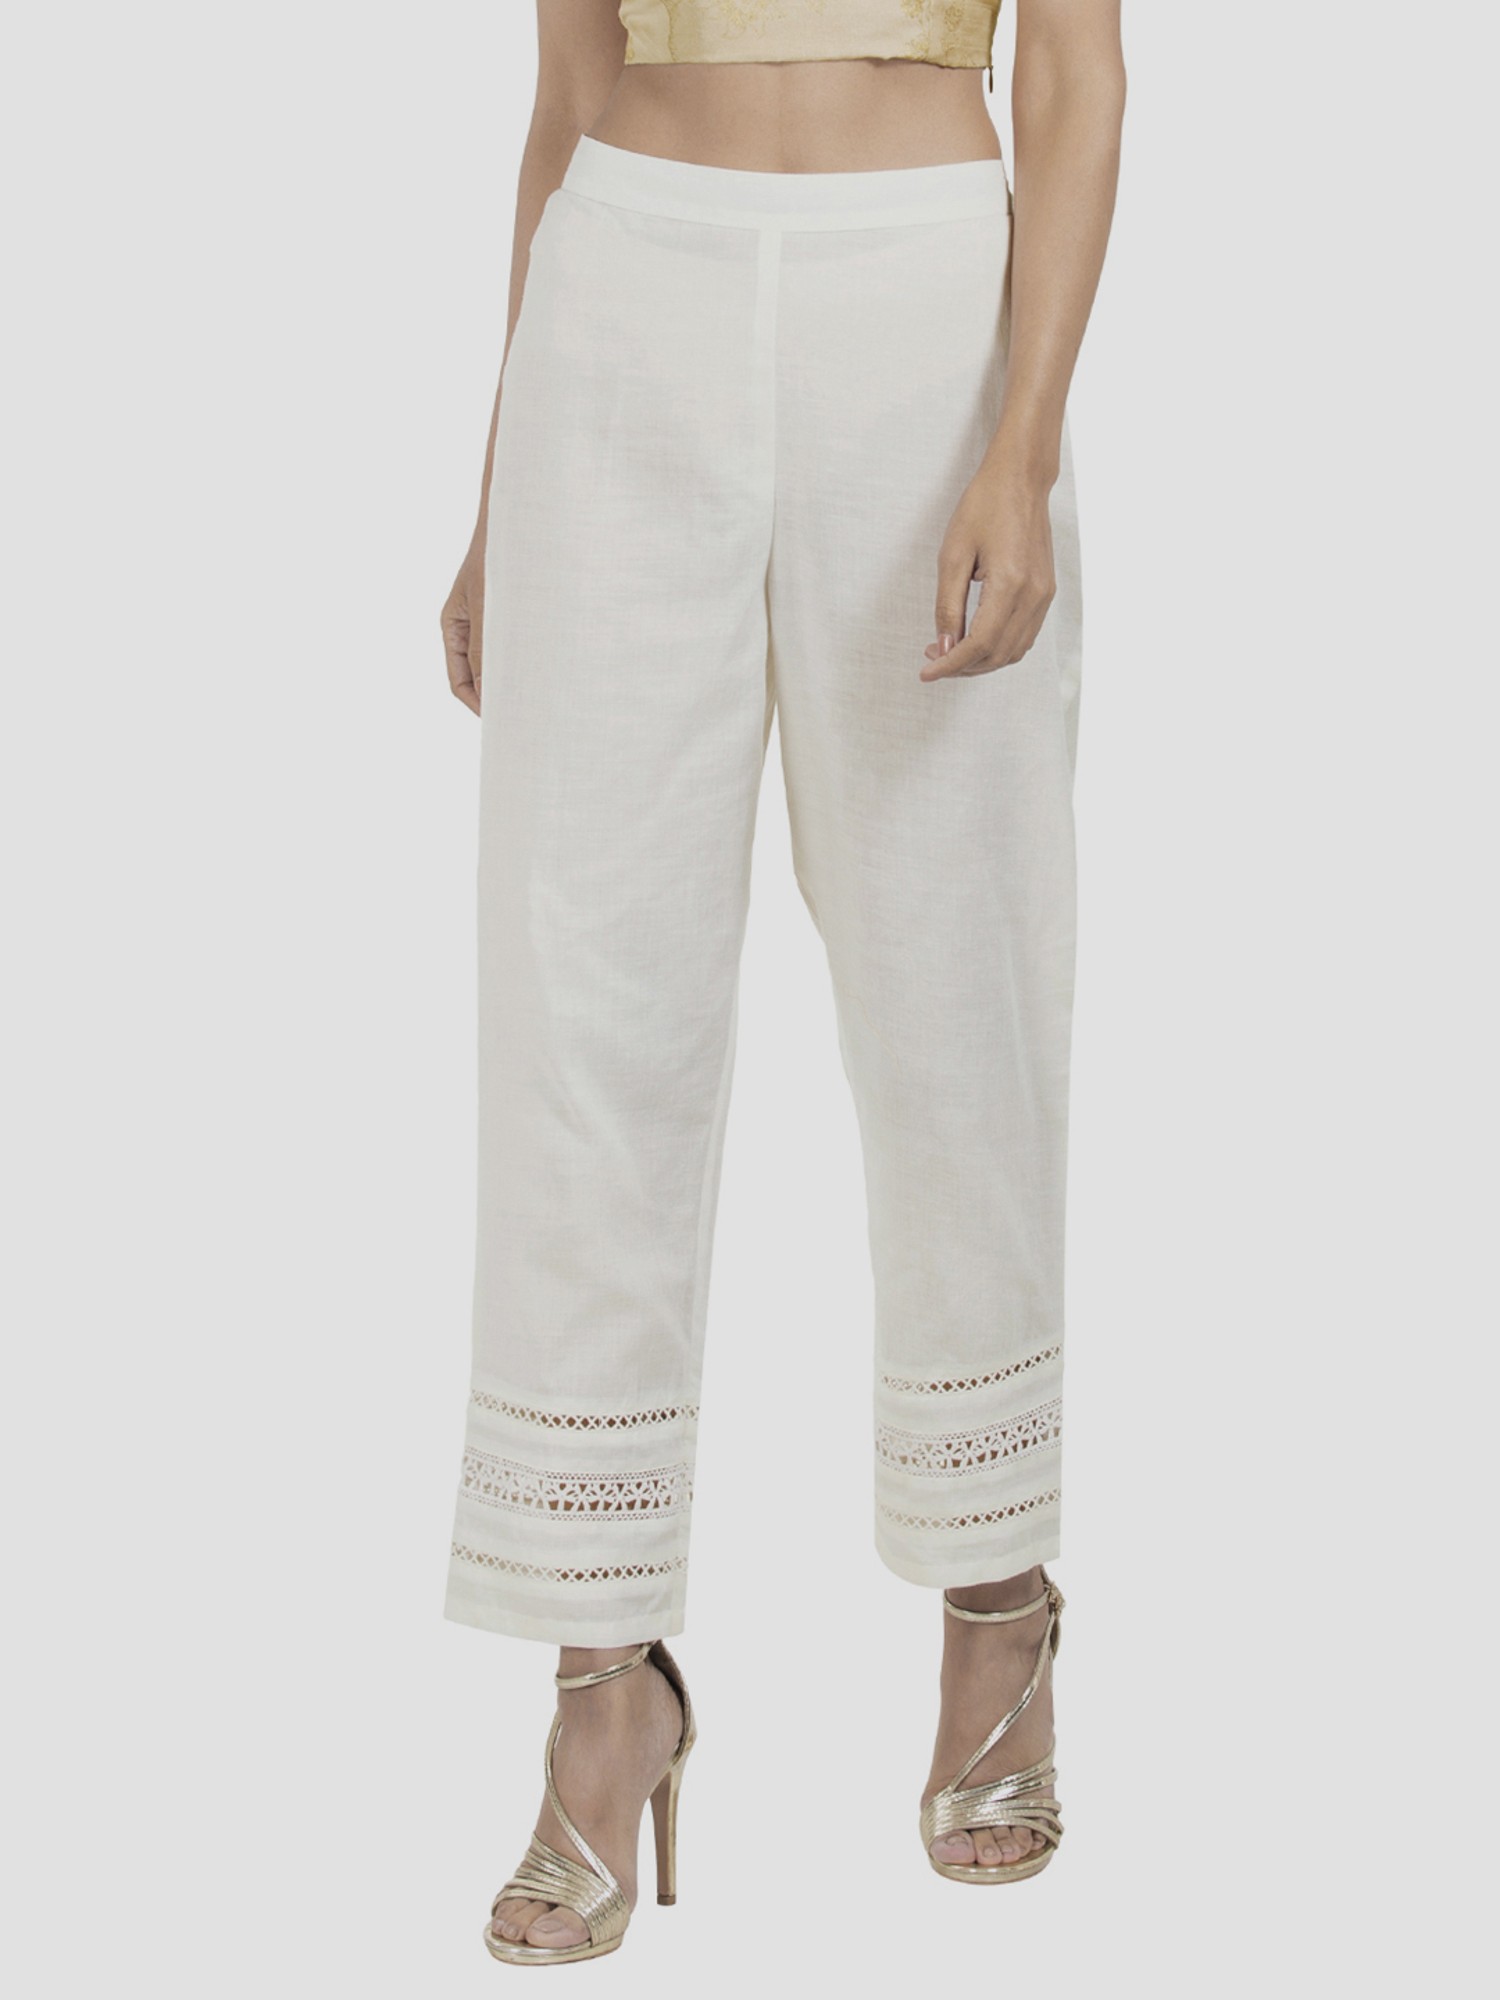 ID0622 Original Ethnic Indian Cotton Trousers Casual Pants - Etsy Finland